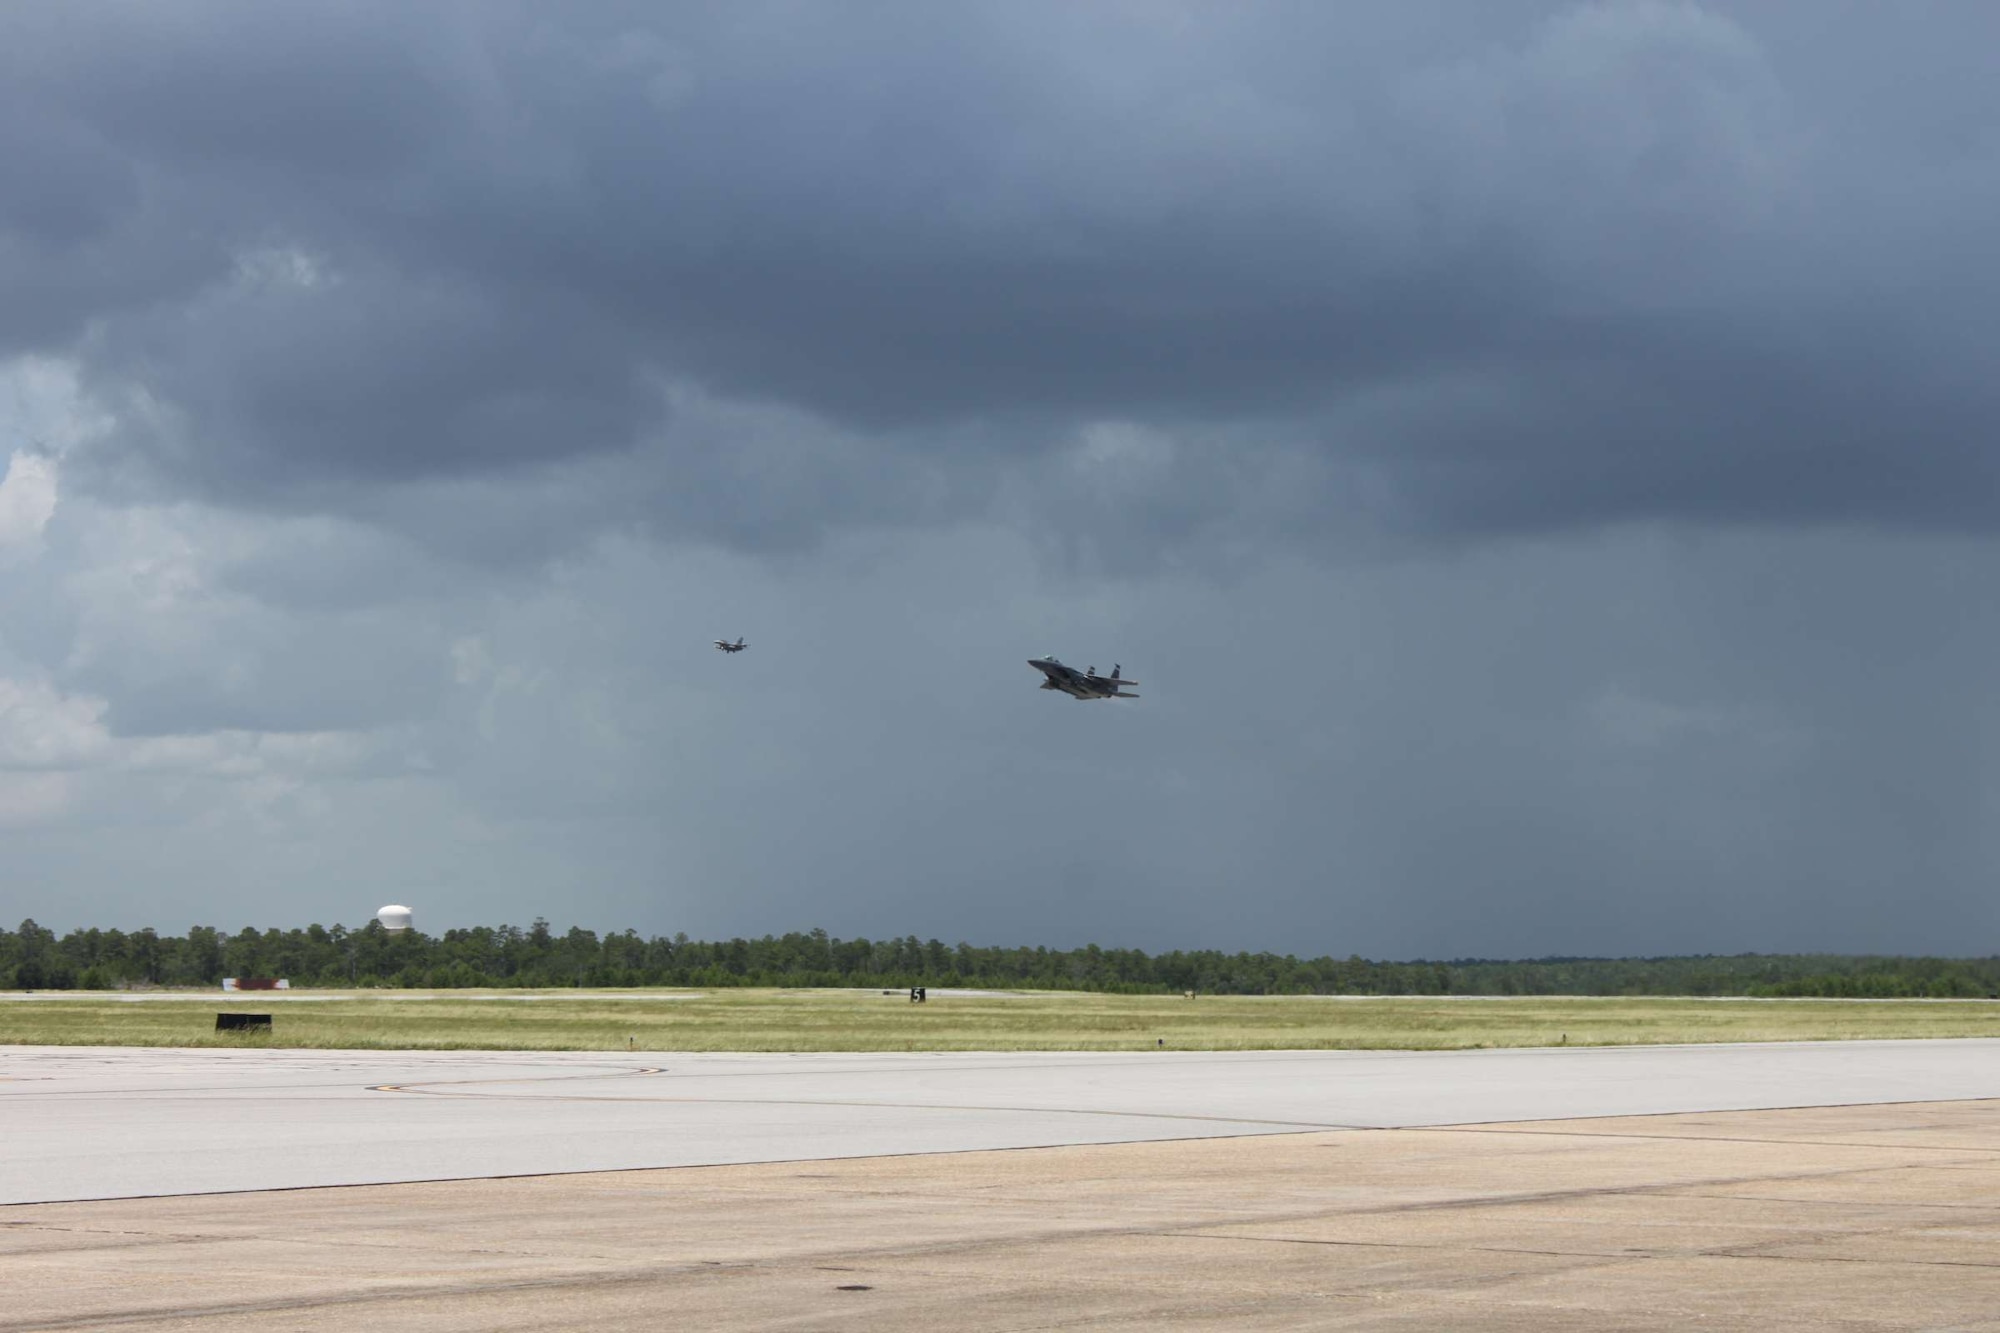 An F-15E lands at Eglin Air Force Base, Florida, July 8, 2016, after a mission in which Boeing F-15 mission systems recorded its first flight with the Advanced Display Core Processor. The advanced mission computer, based on commercial technology, provides multi-core processing capabilities propelling the F-15 to the forefront of fighter embedded computing systems. The ADCP II high-speed processing and interface designs enable advanced
systems integration, increased mission effectiveness, augmented fault-tolerance, enhanced system stability and aircrew survivability. (Courtesy photo)
